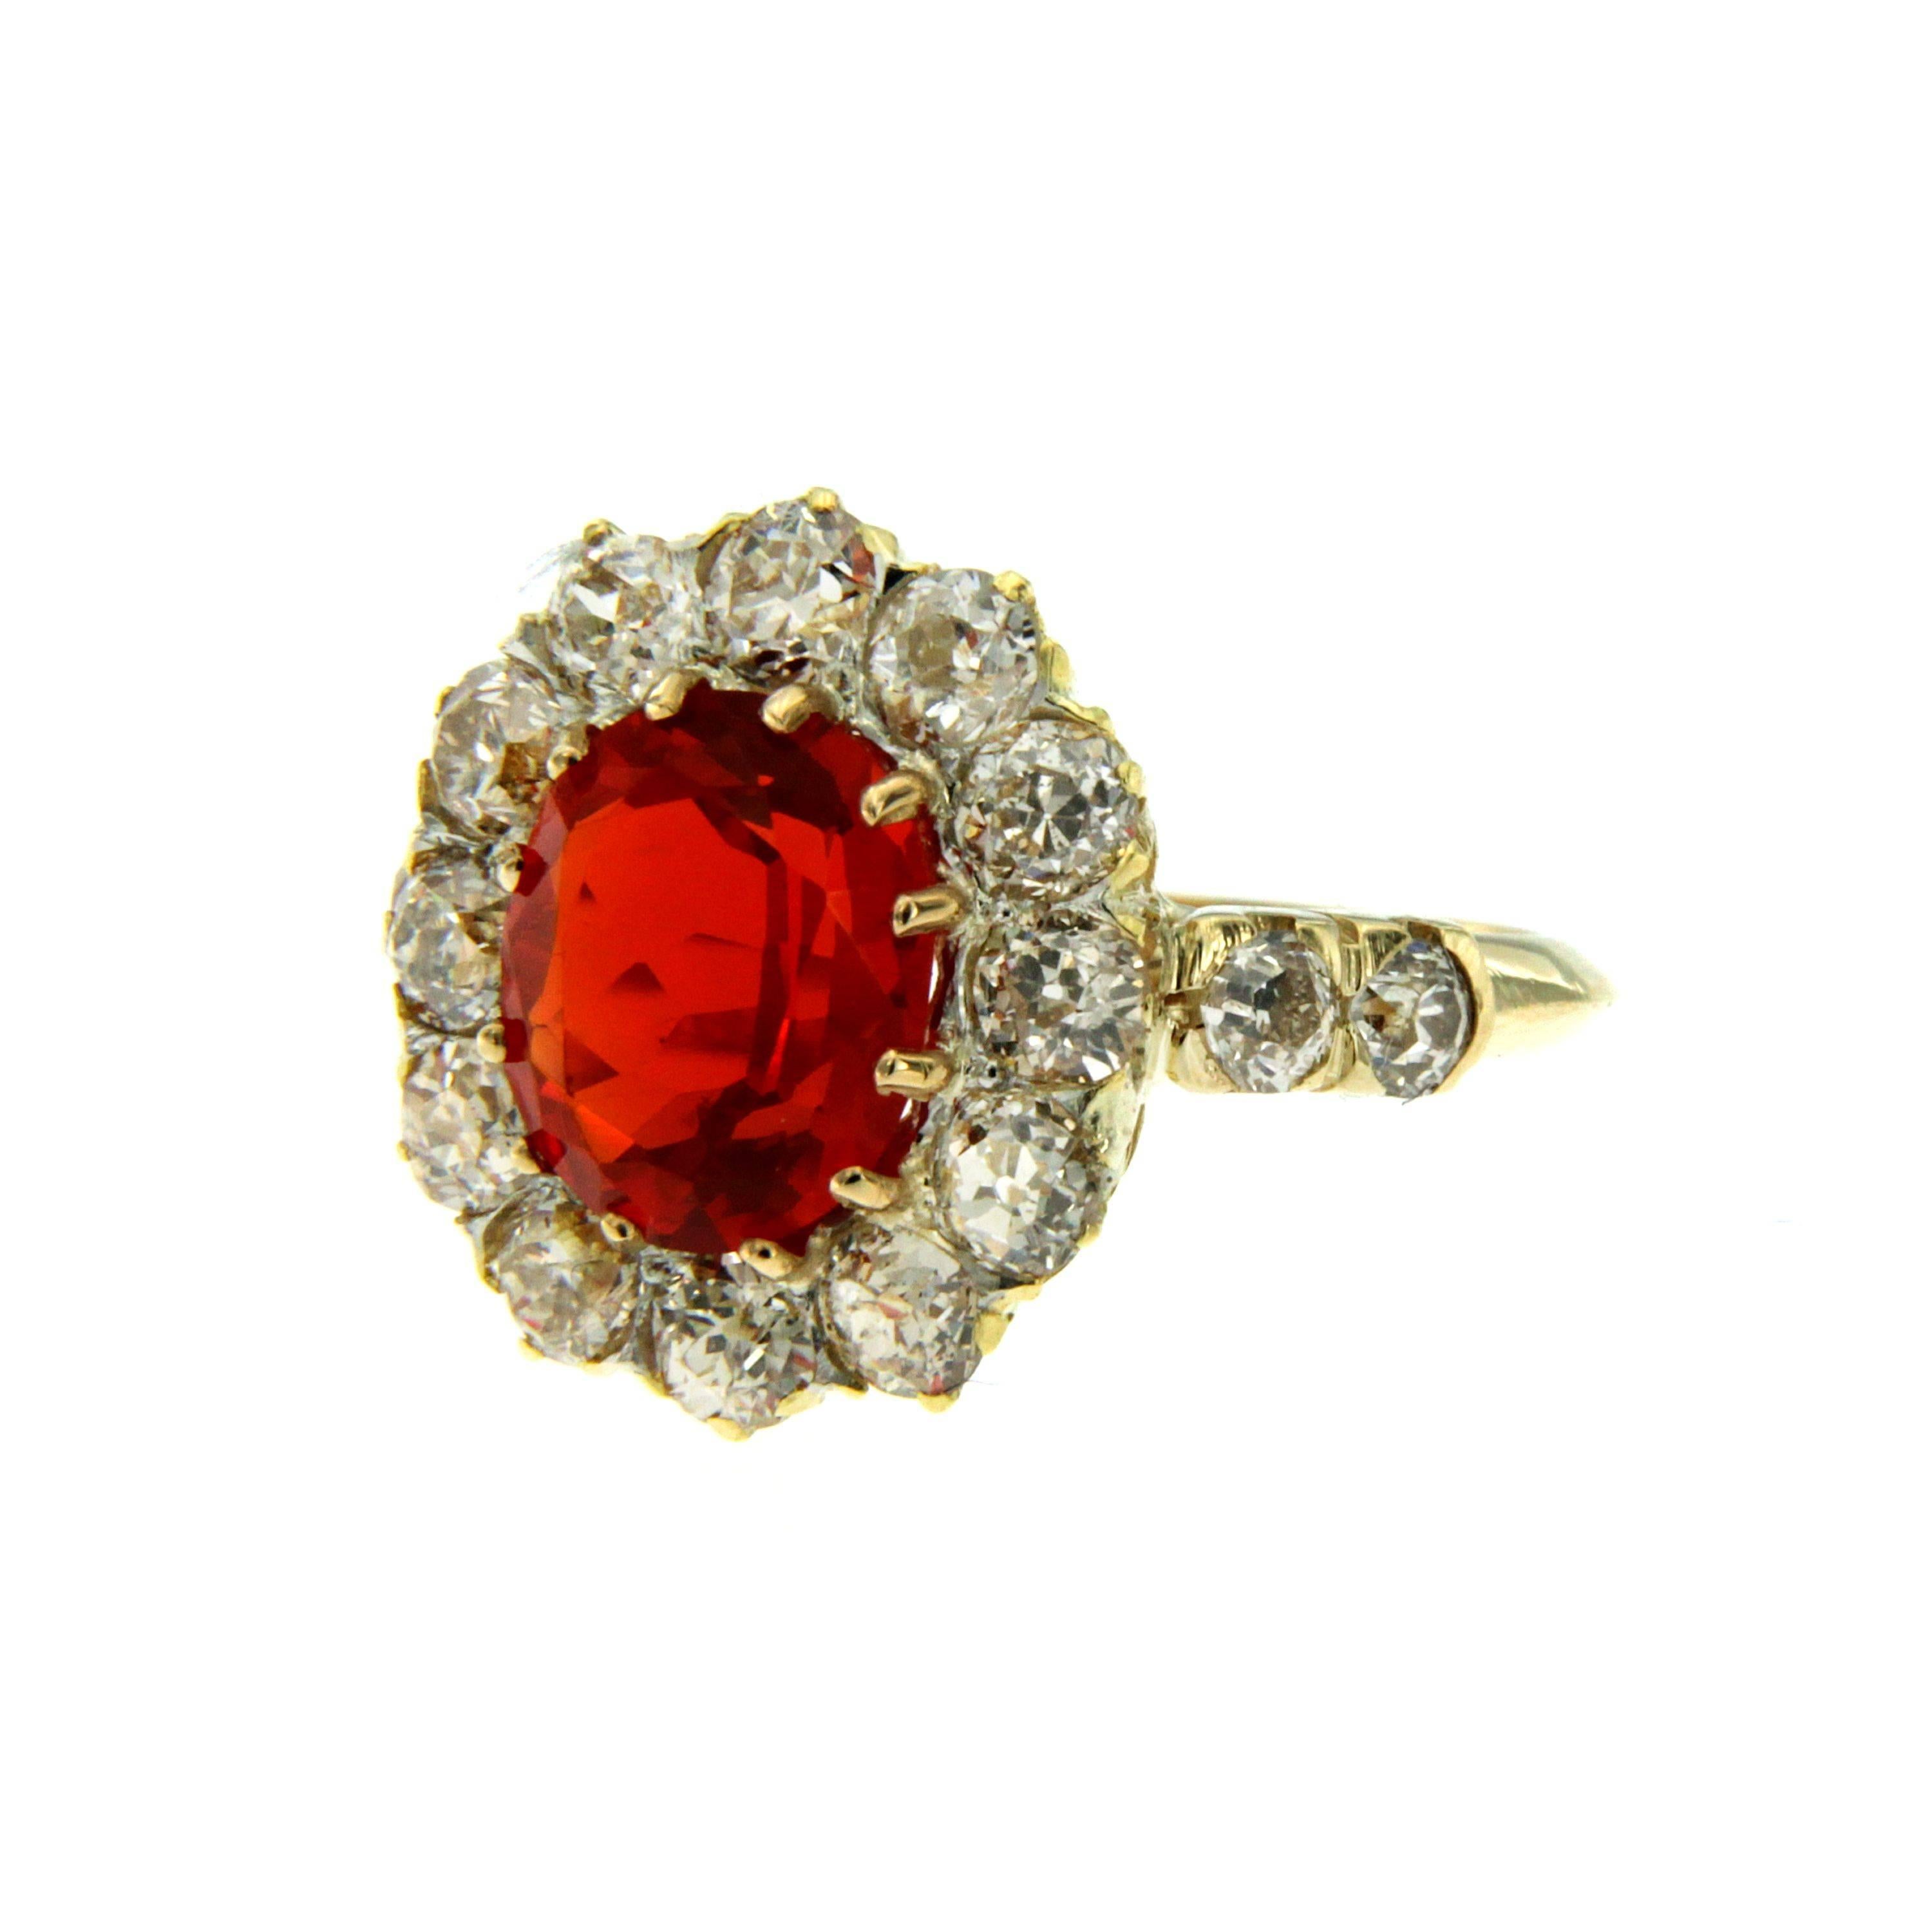 Mounted in 18k yellow gold, this cluster ring dates 1910, is set in the center with  one Fire Opal of extraordinary beauty, weighing 1.71 carat and surrounded by approx. 2.50 carat of sparkling old mine cut Diamonds graded H/I color vvs 

This